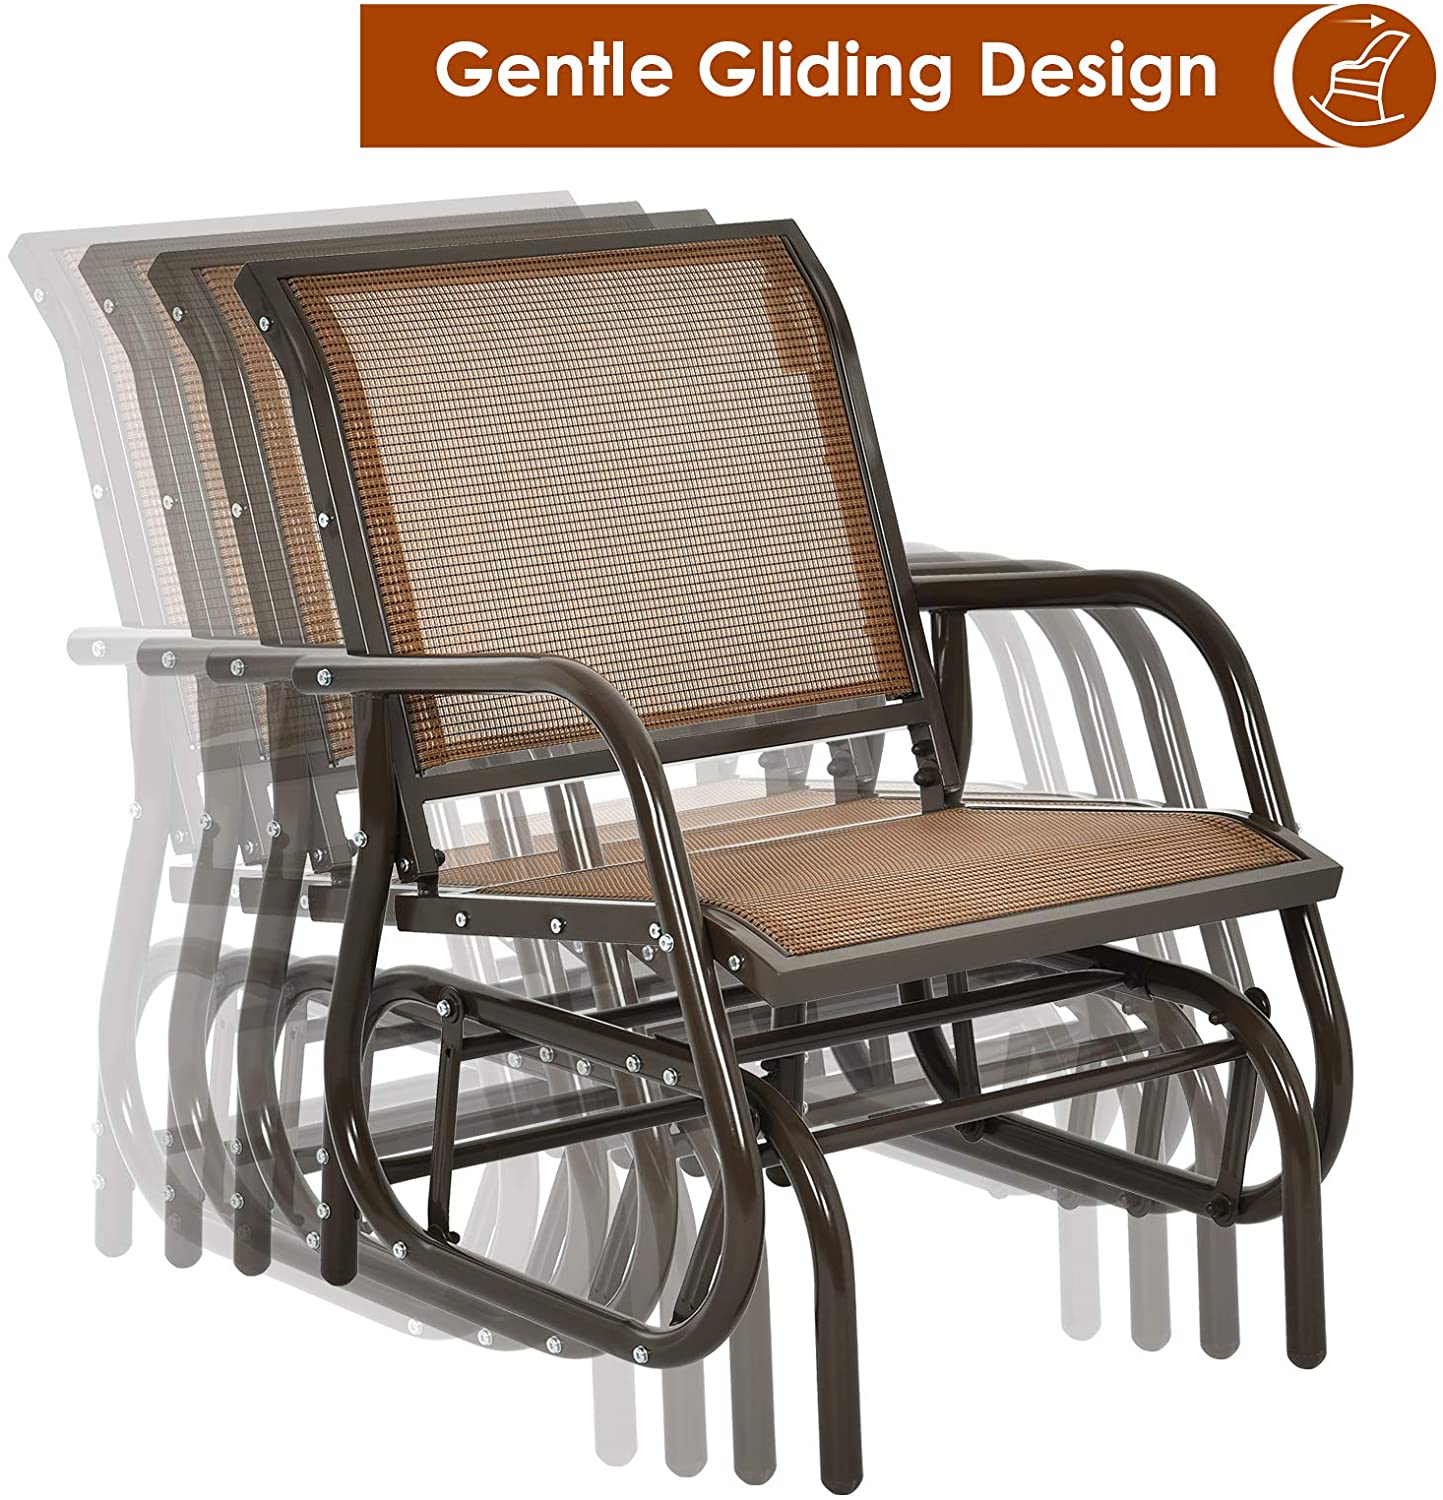 Swing Glider Chair W/Study Metal Frame Comfortable Patio Chair